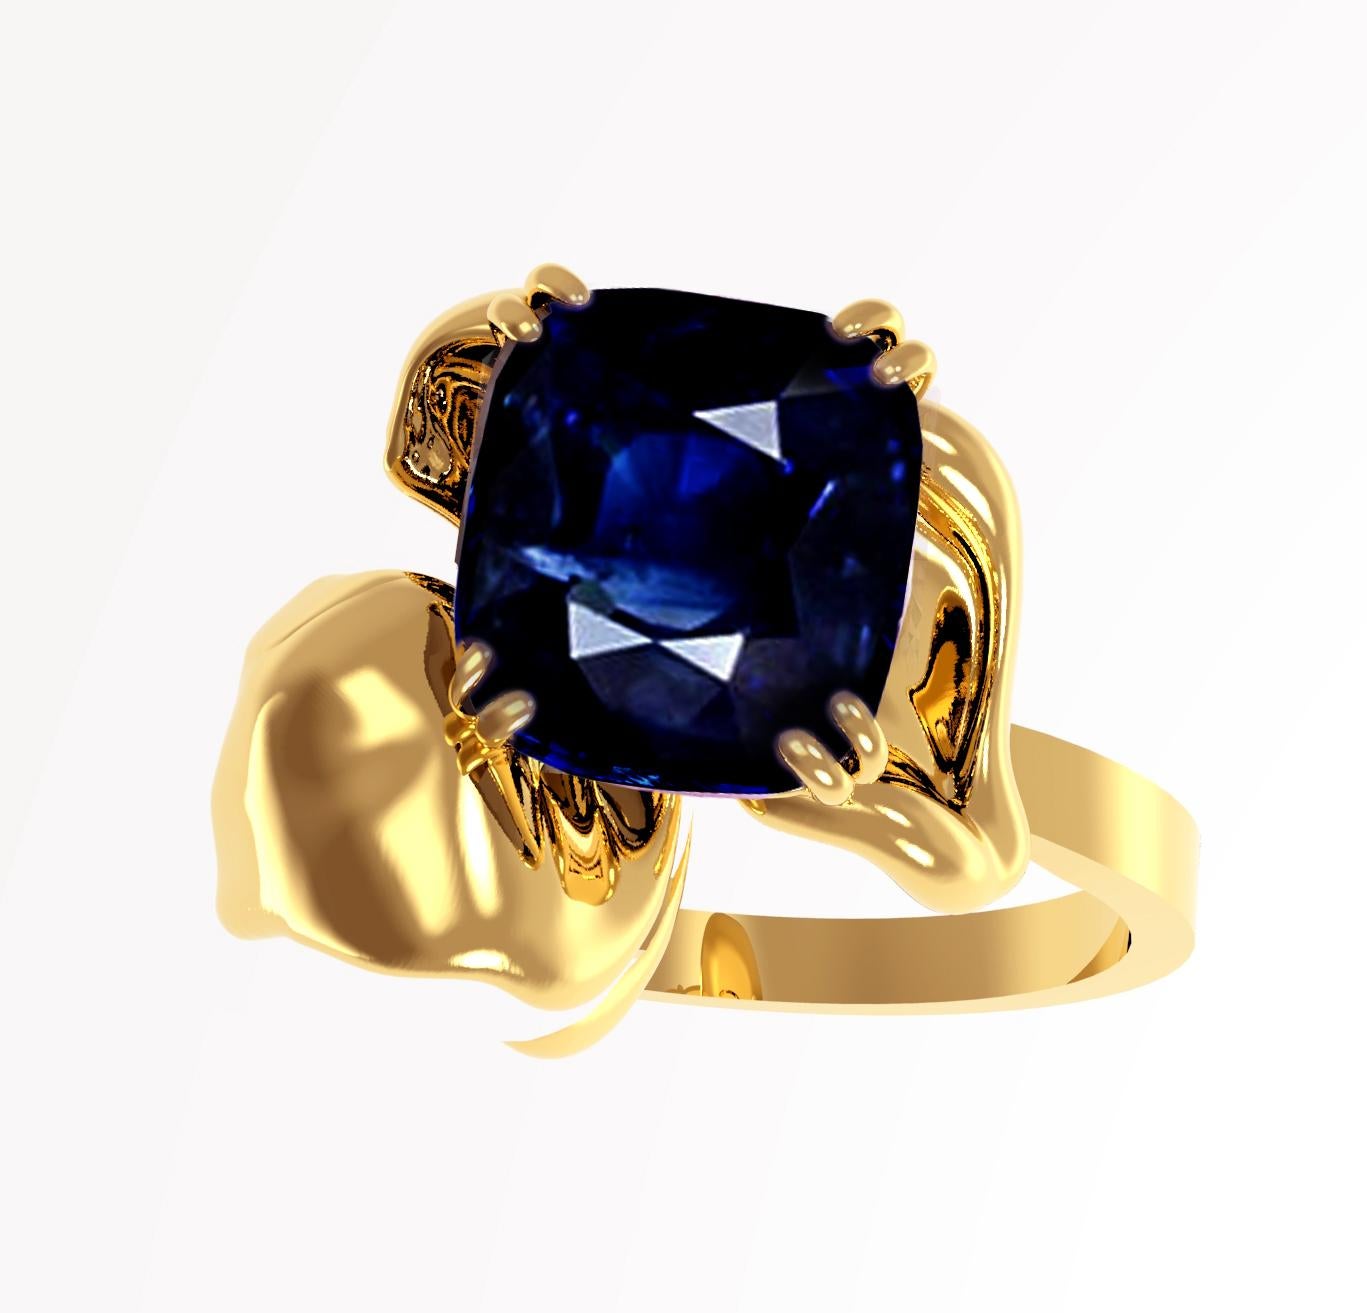 This contemporary cocktail ring is made of 18 karat yellow gold and is encrusted with a natural vivid blue great cut transparent cushion sapphire weighing 1,75 carats and measuring 7.5x7mm. The ring's unique design features a tiny flower shape that